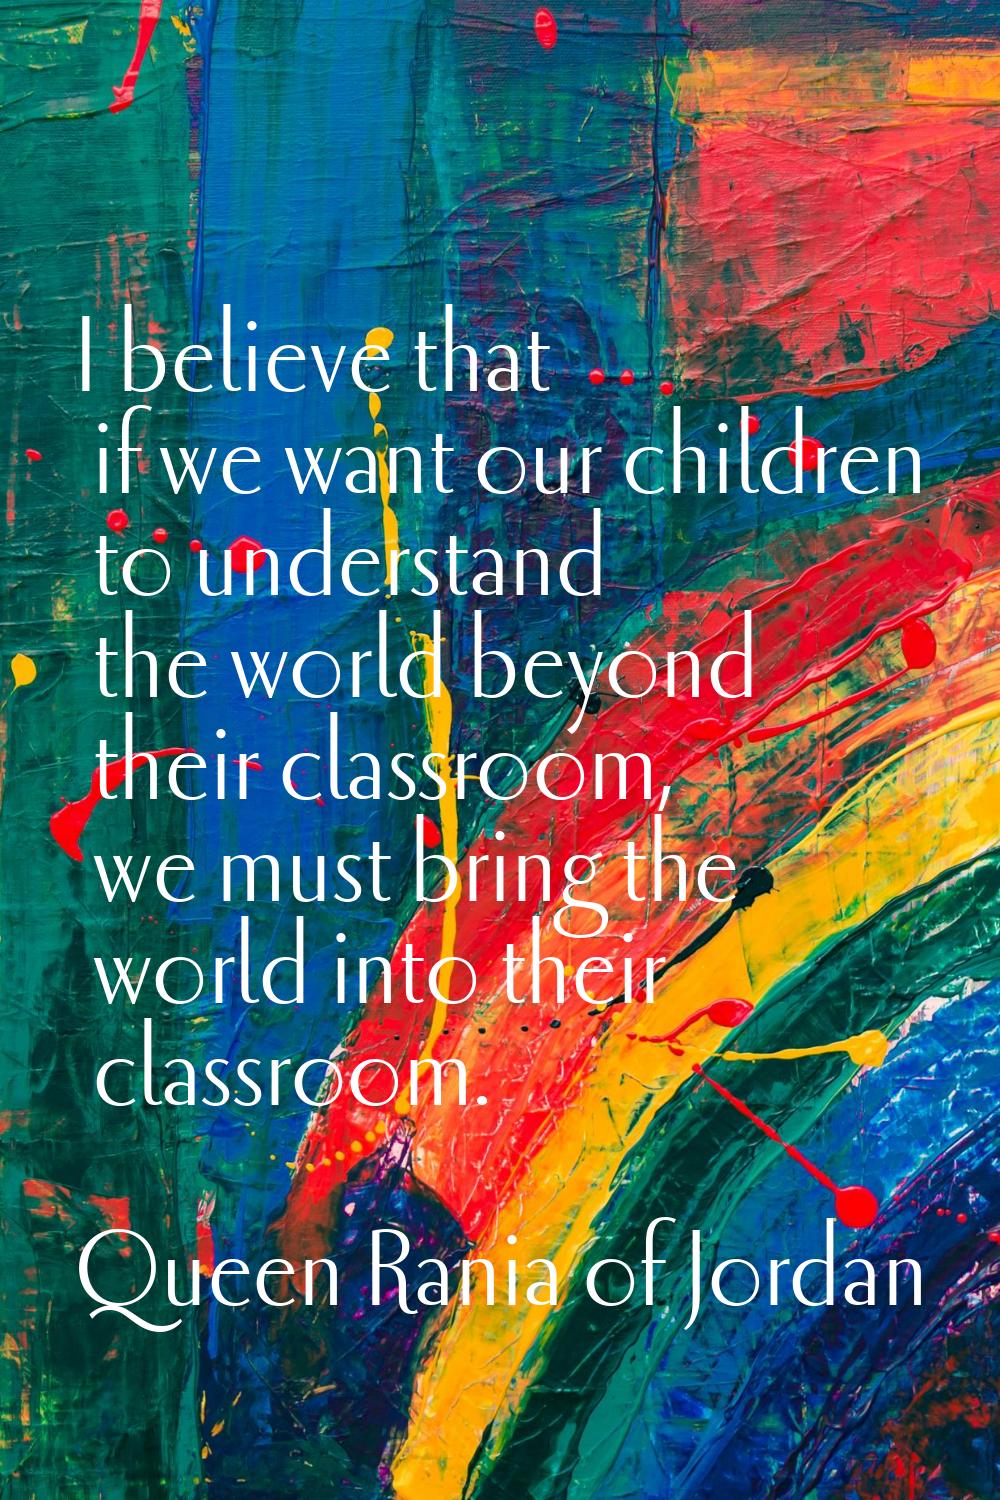 I believe that if we want our children to understand the world beyond their classroom, we must brin